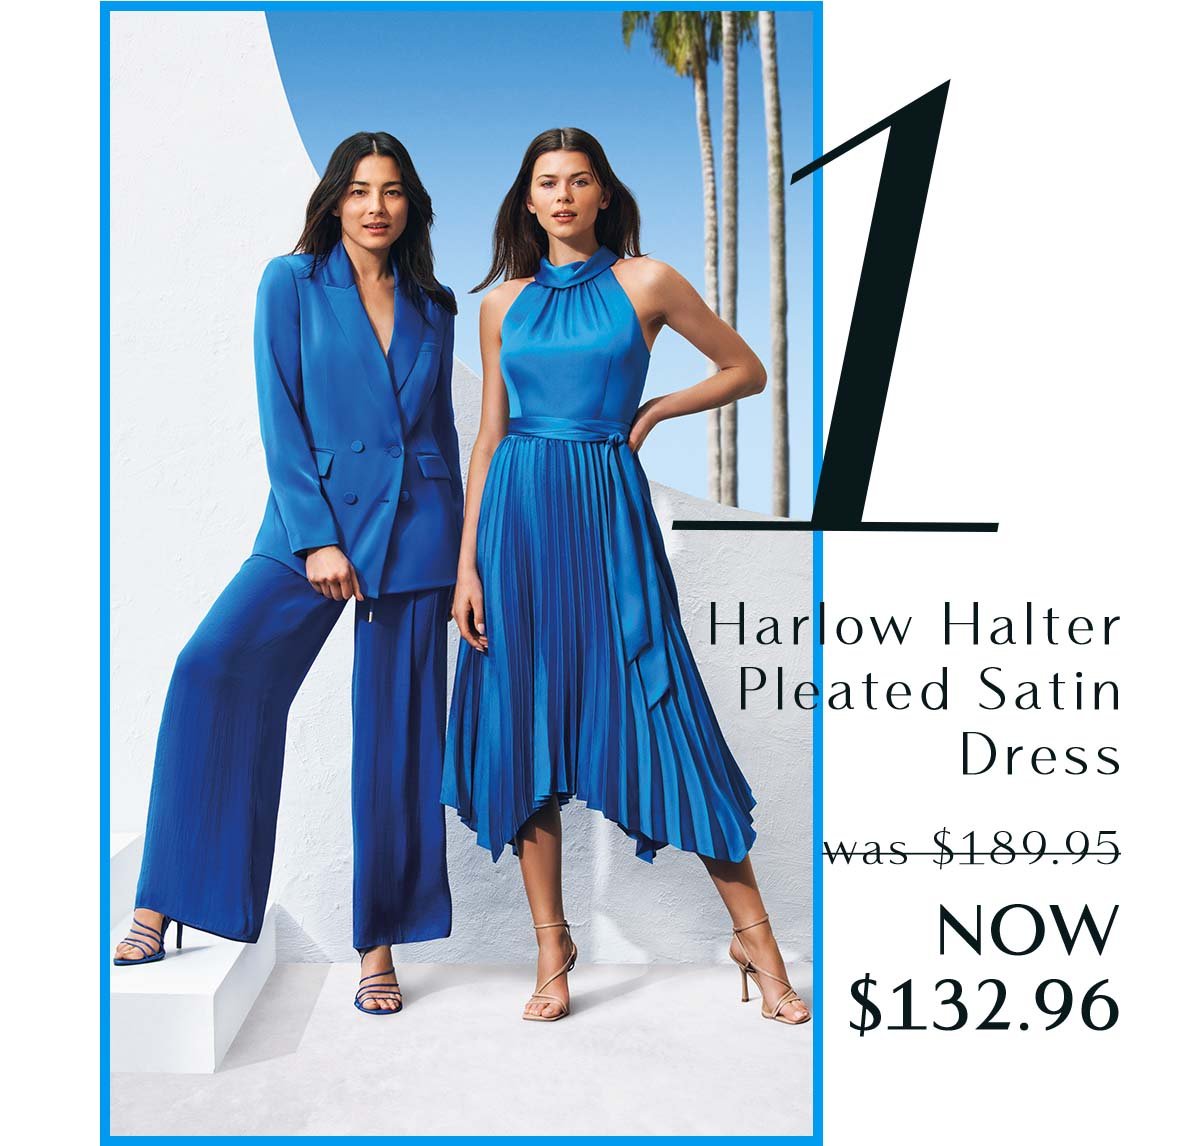 1. Harlow Halter Pleated Satin Dress  was $189.95 NOW $132.96